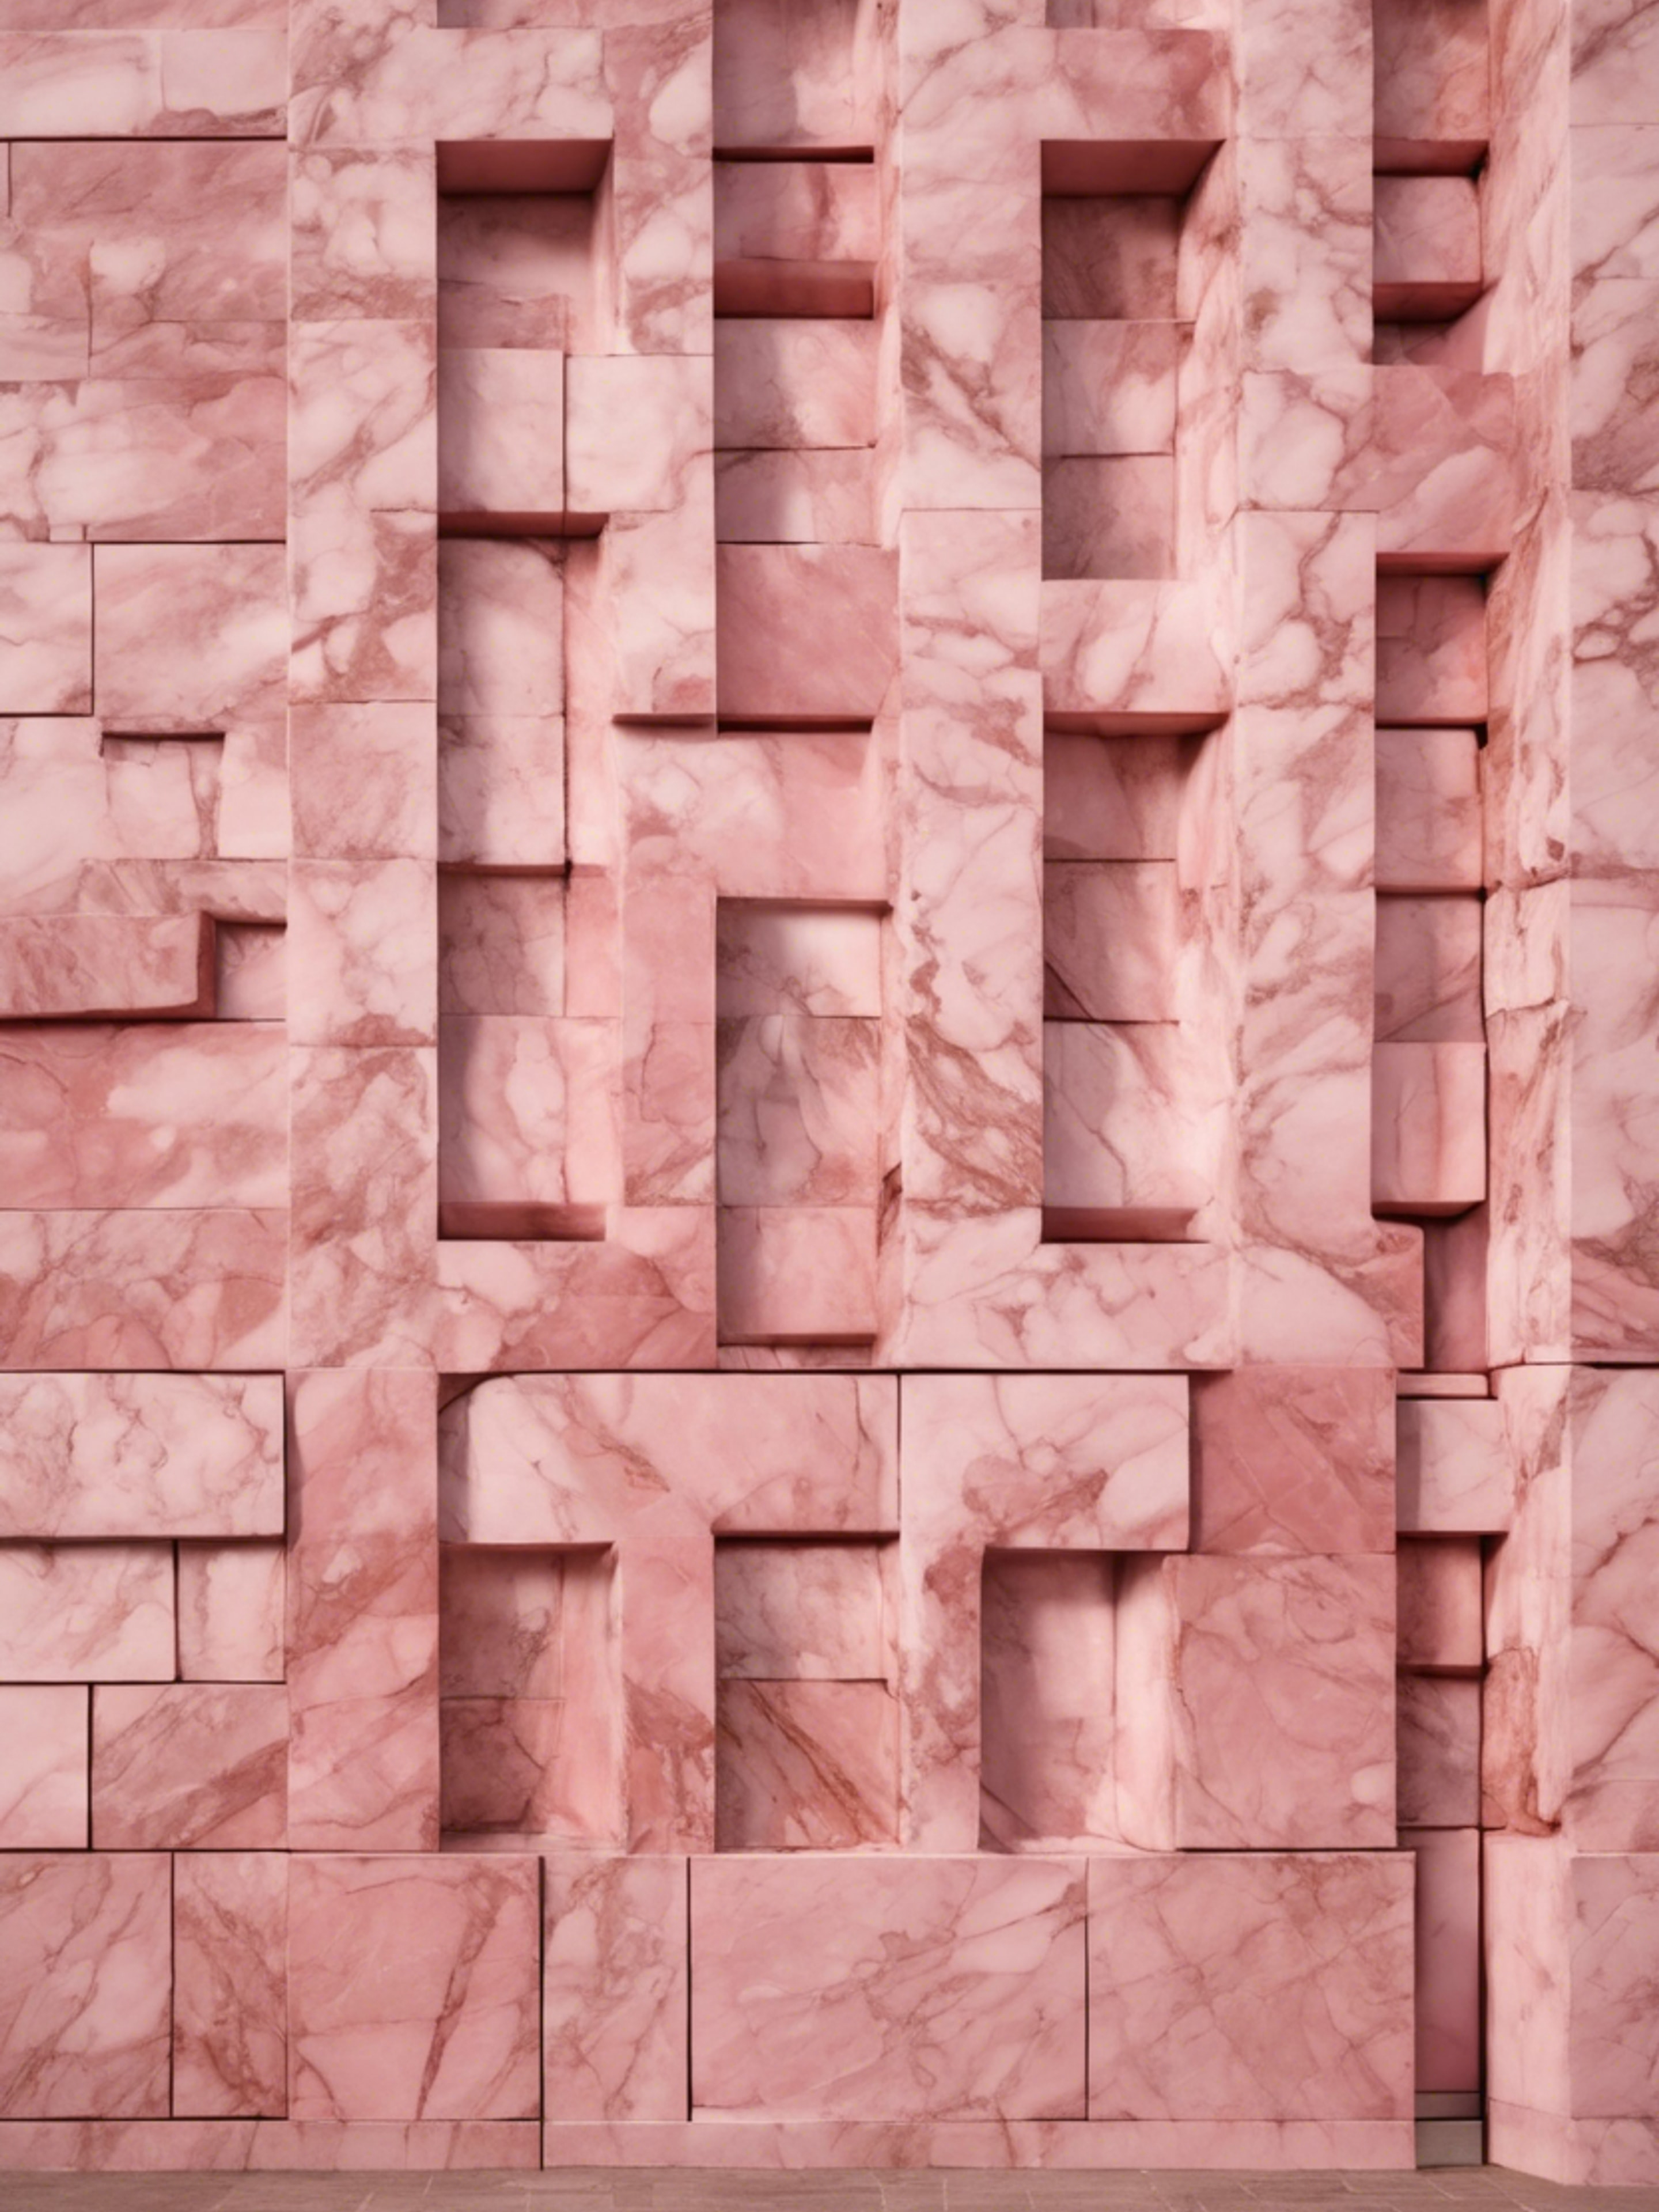 An outdoor wall of a building, made of polished pink marble.壁紙[24255f95efd34f59a019]